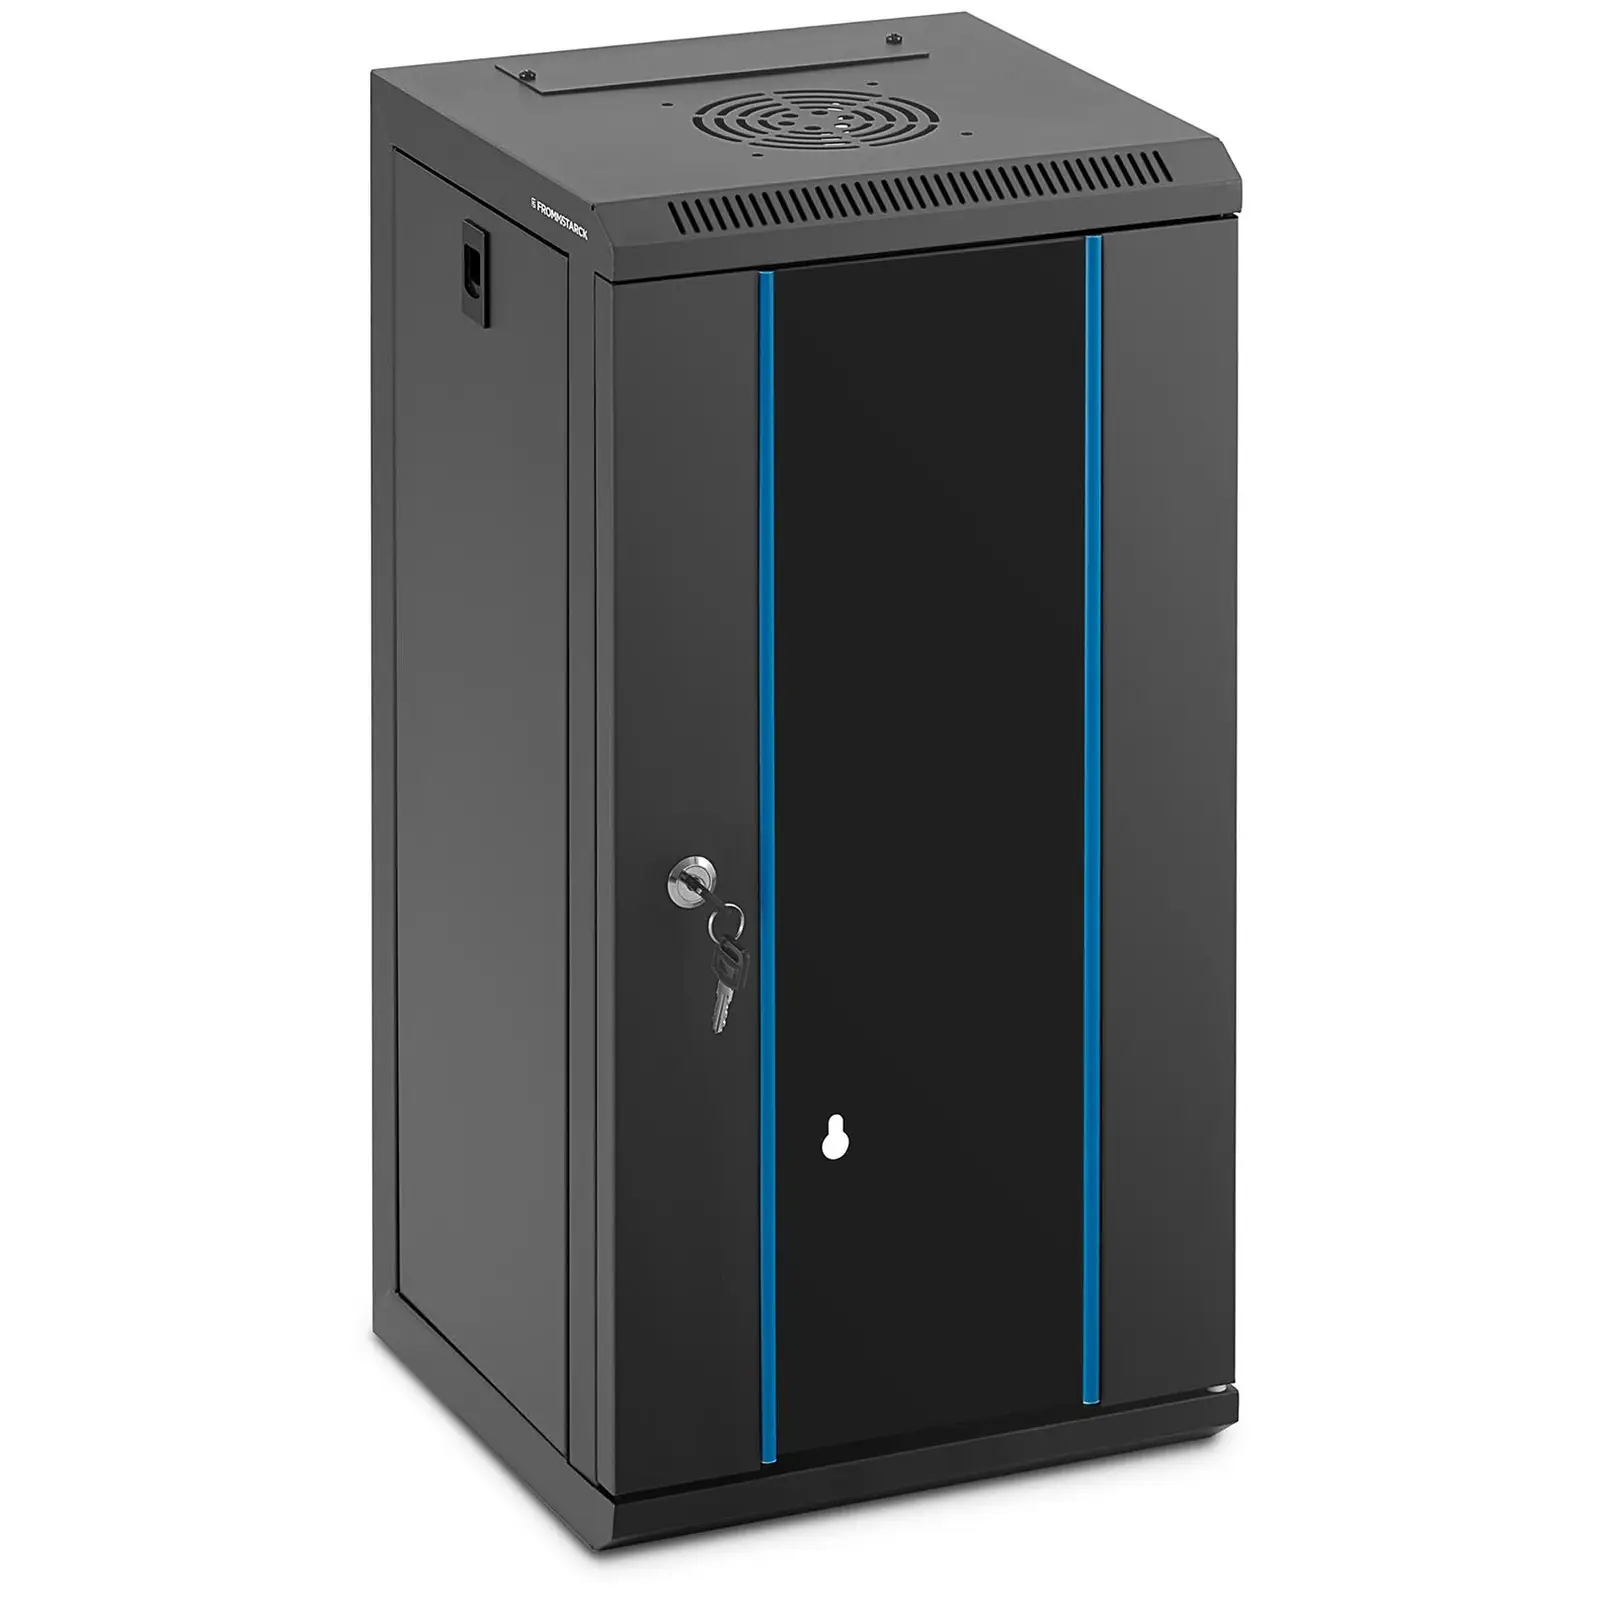 Factory second Server Rack - 10 inches - 12 U - lockable - up to 60 kg - Black